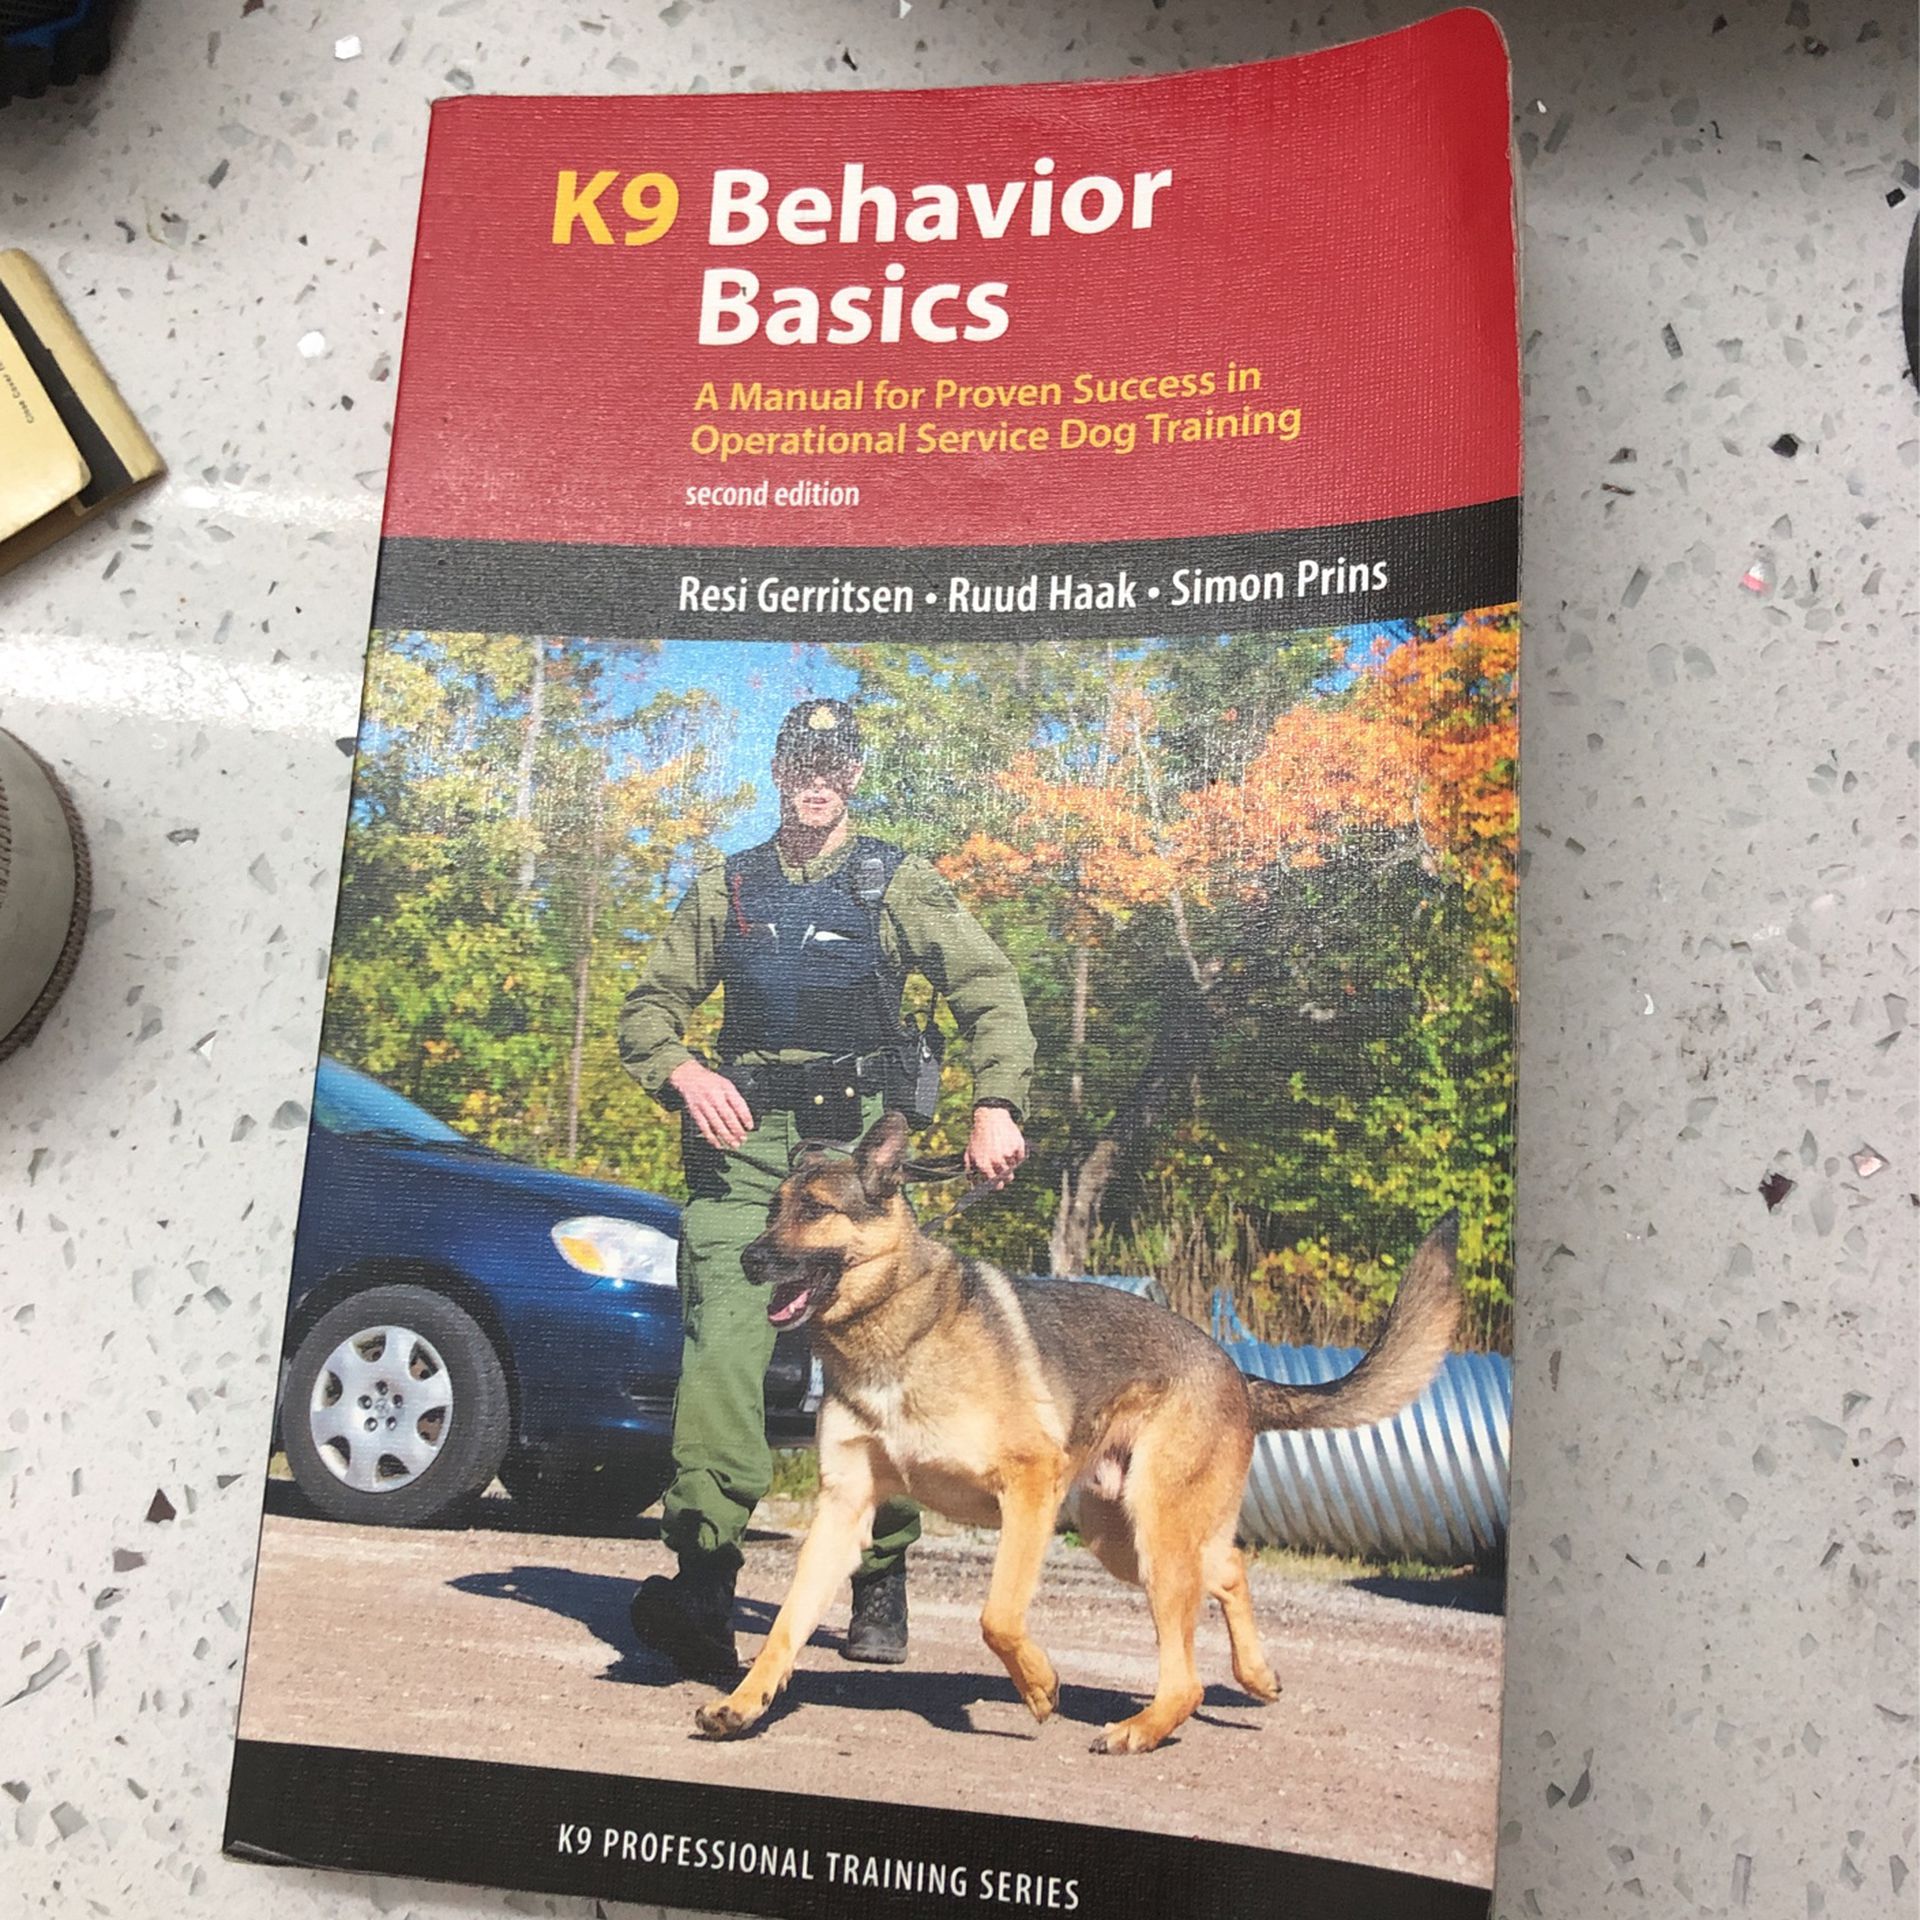 K9 Behavior Basics: A Manual For Proven Success In Operational Service Dog Training 2nd Ed.